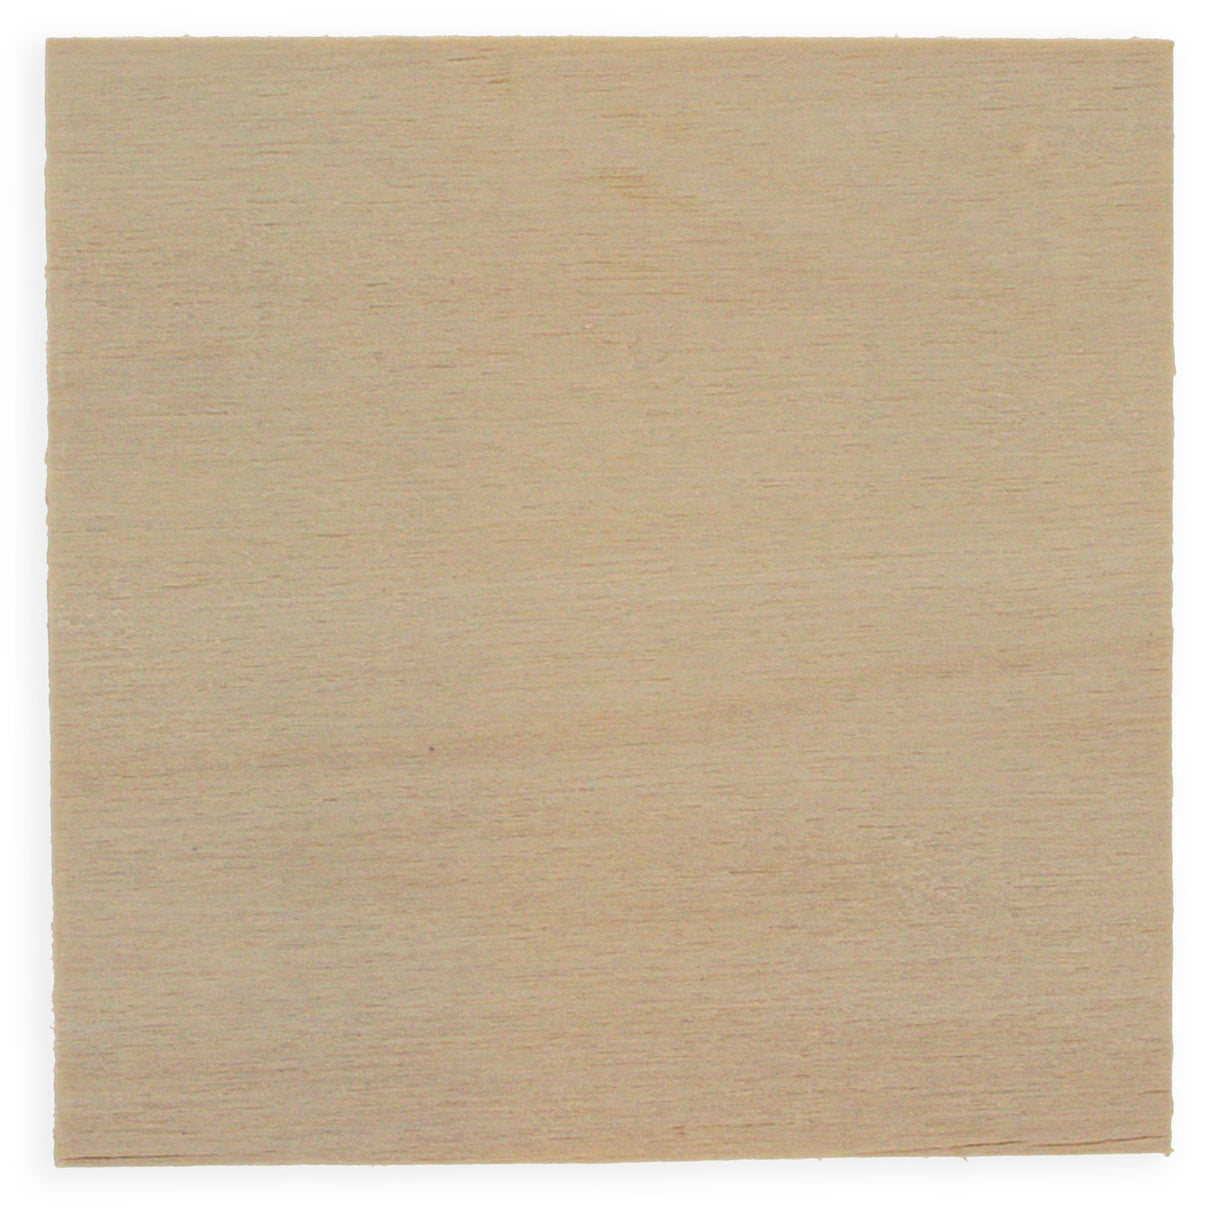 Wood Square Wooden Plaque DIY Crafts Blanks Unfinished 2.9 Inches in Beige color Square